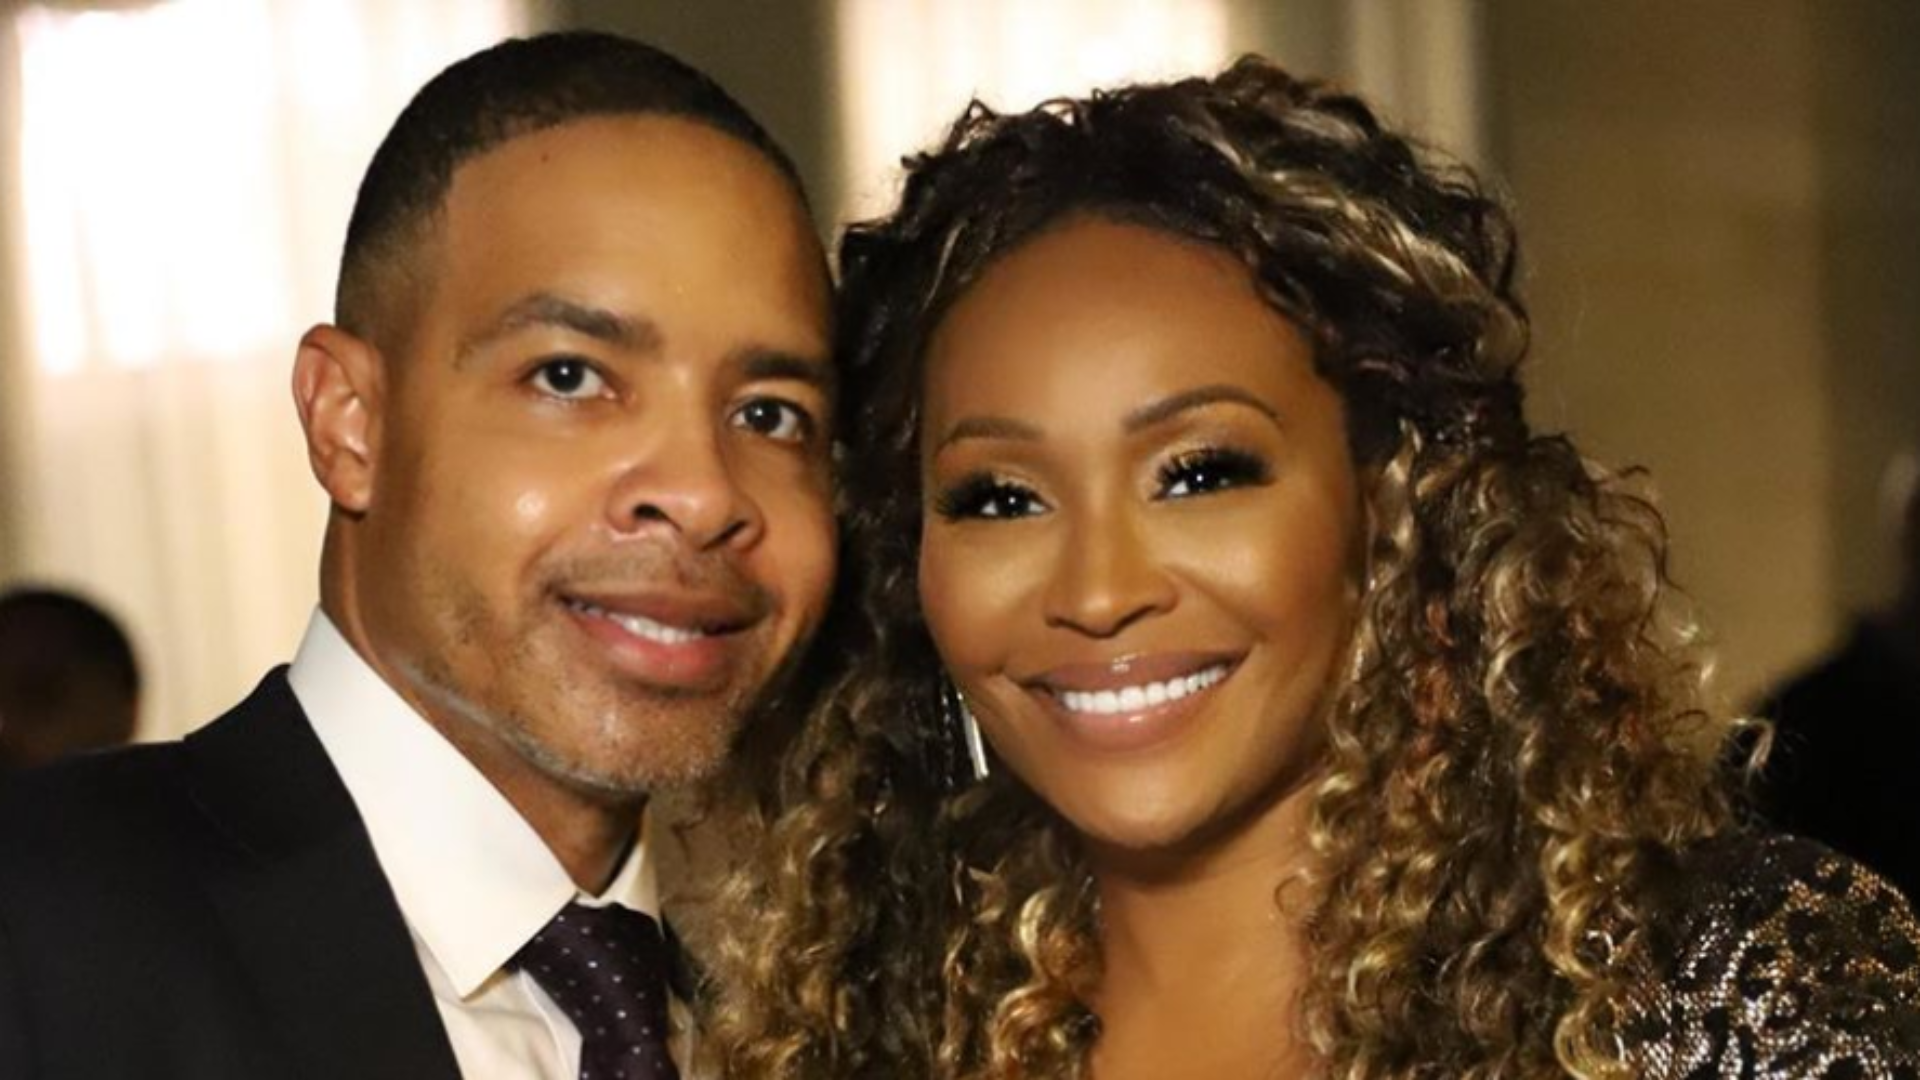 Save The Date! Cynthia Bailey and Fiancé Mike Hill Reveal Their Wedding Date